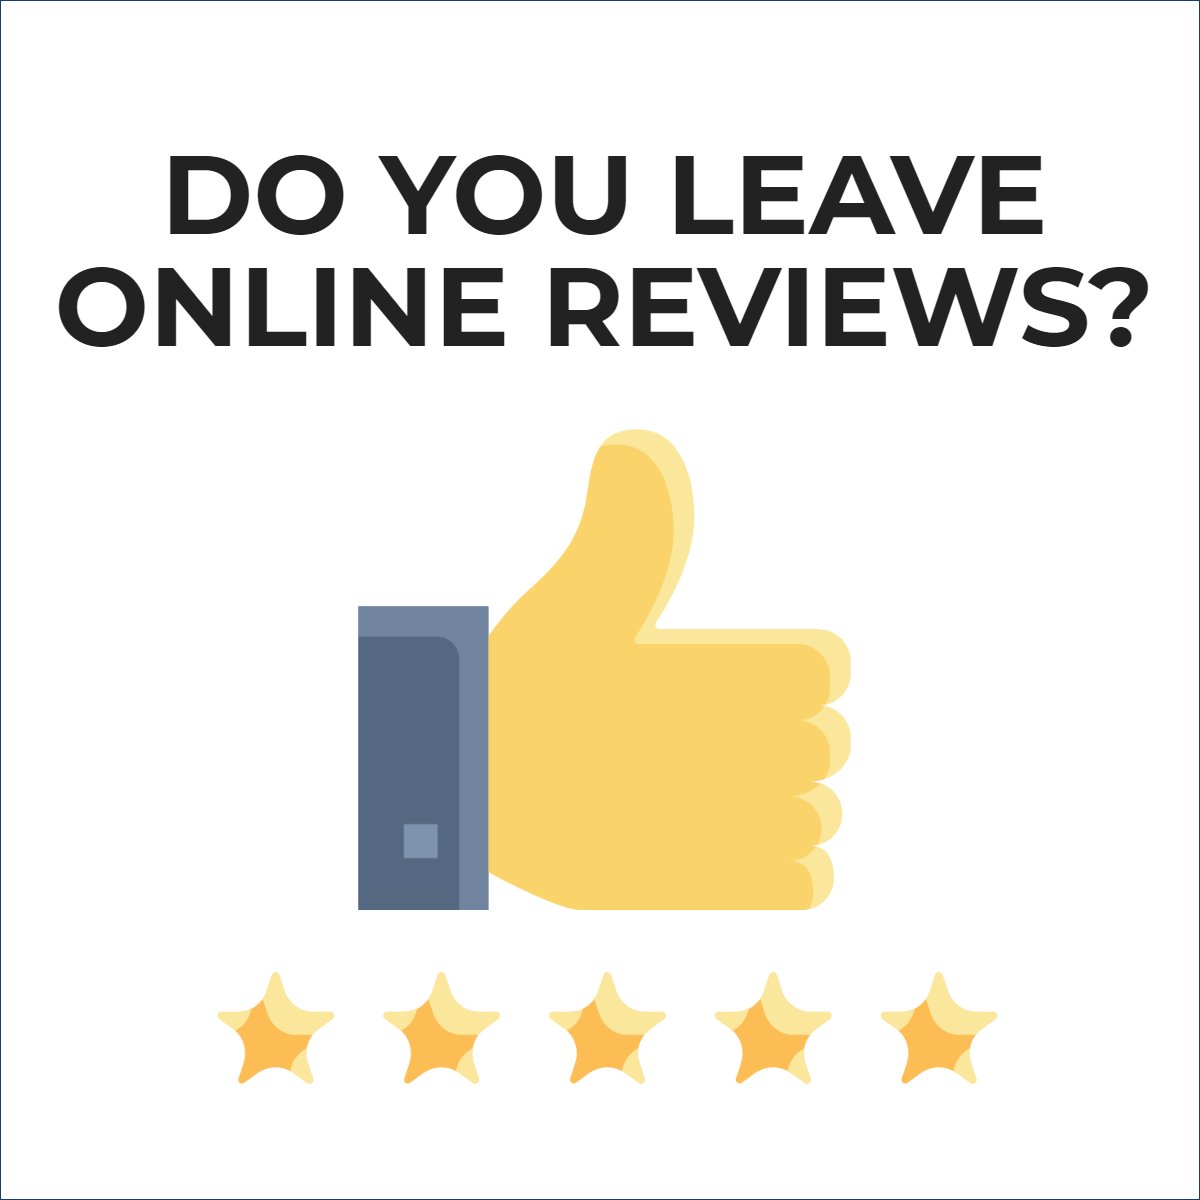 Did you know that 90% of consumers read online reviews before visiting a business? 😉

#onlinereviews #onlinereviewsmatter #realestate #realestatecoach #digitalmarketing #reviews #reputation 
 #realestate #realtor #newhome #househunting #renatashomes #kellerwilliamas